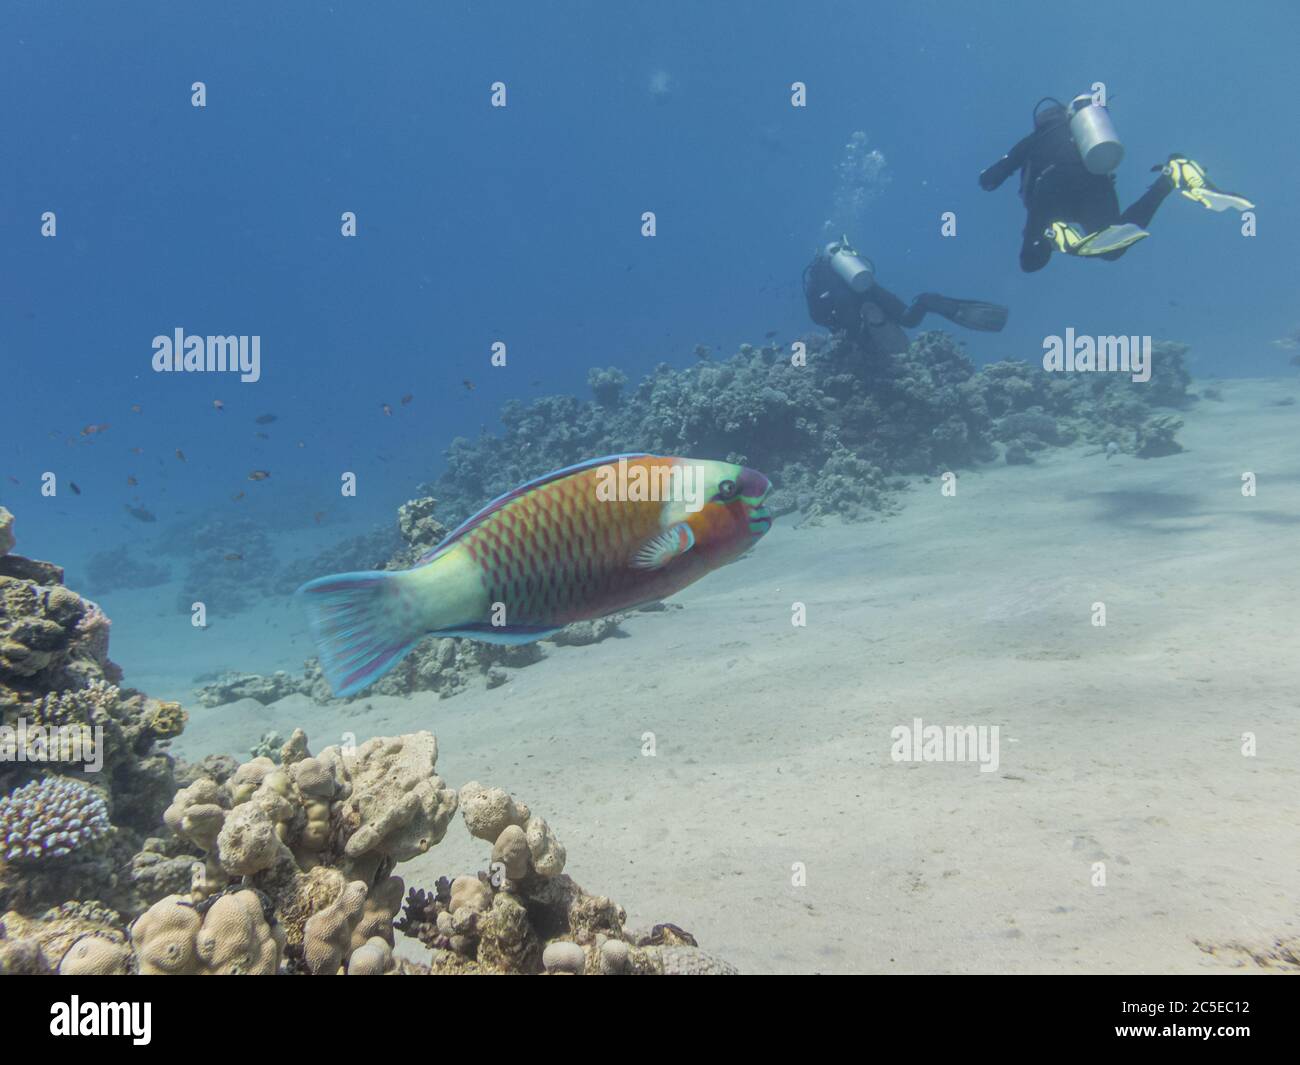 A parrotfish with two scuba divers in the background. Blue water, white sand. Picture from the Red Sea, near Hurghada, Egypt Stock Photo